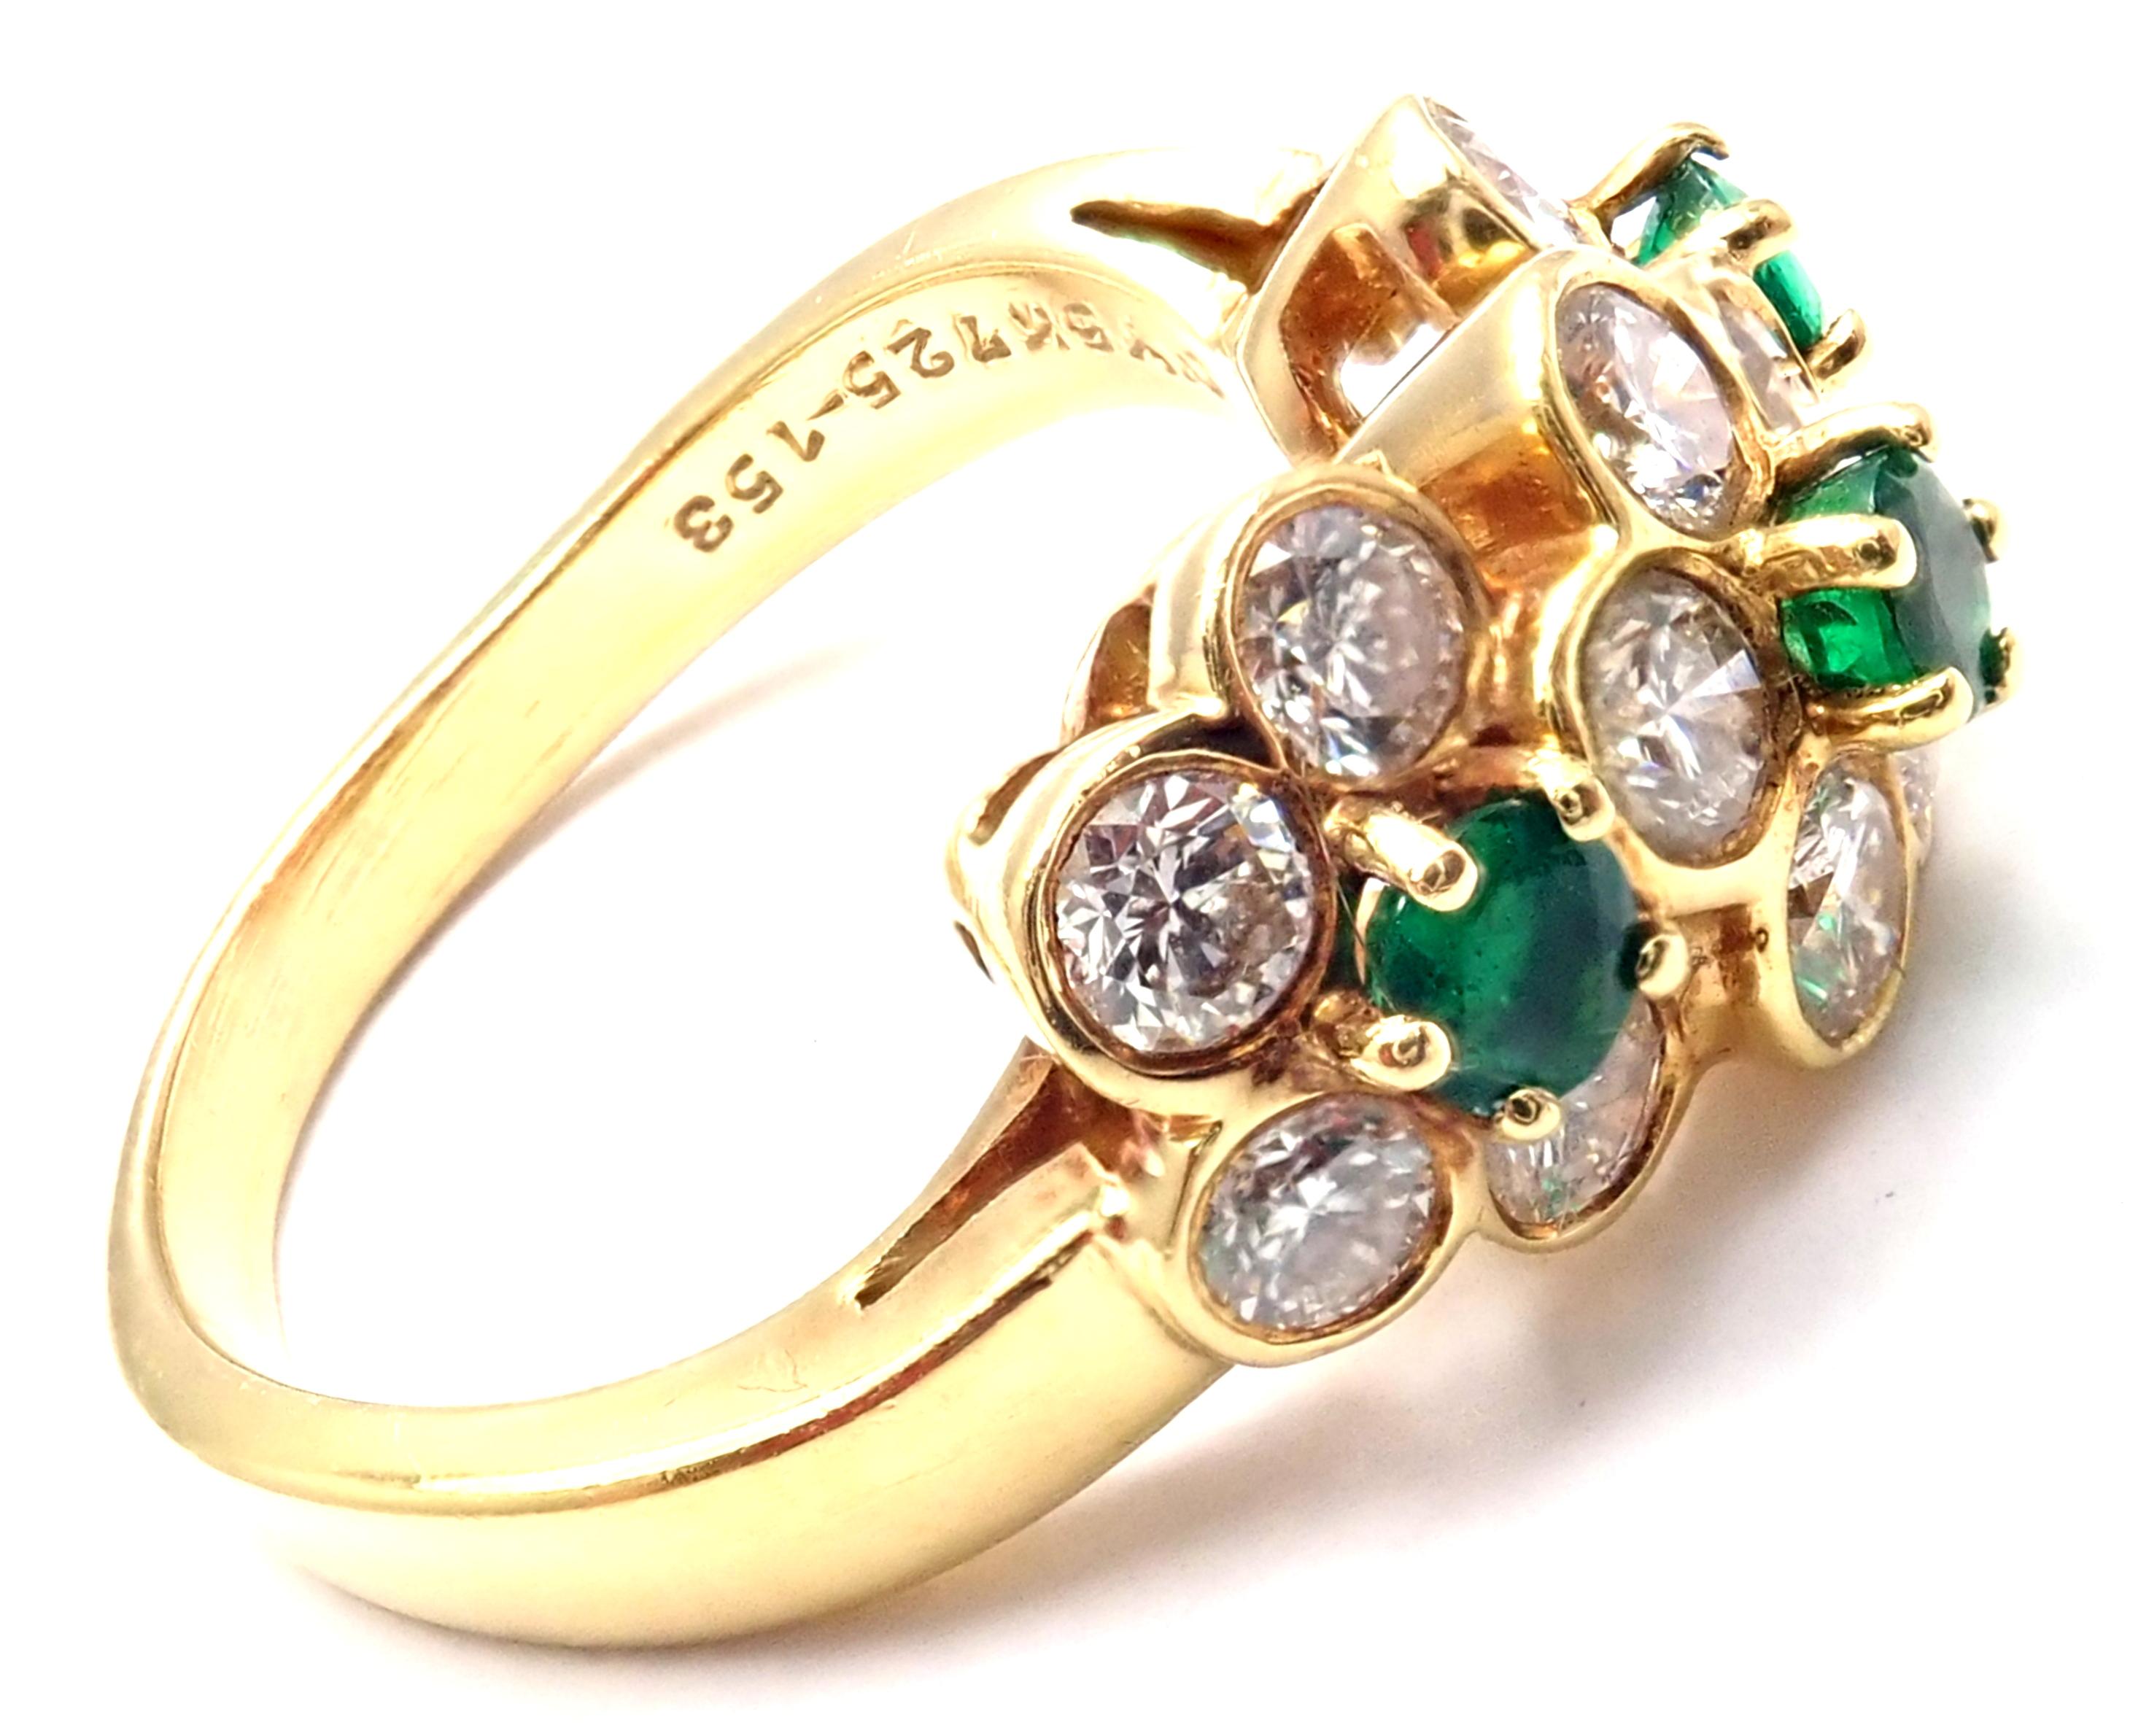 18k Yellow Gold Diamond And Emerald Flower Band Ring by Van Cleef & Arpels. 
With 13 diamonds, VS1 Clarity, G Color. Total Diamond Weight approx. 1.00ctw. 
3 Emeralds total weight approximately 0.39ct
Details:
Weight: 5.1 grams
Size: 4 3/4
Width at